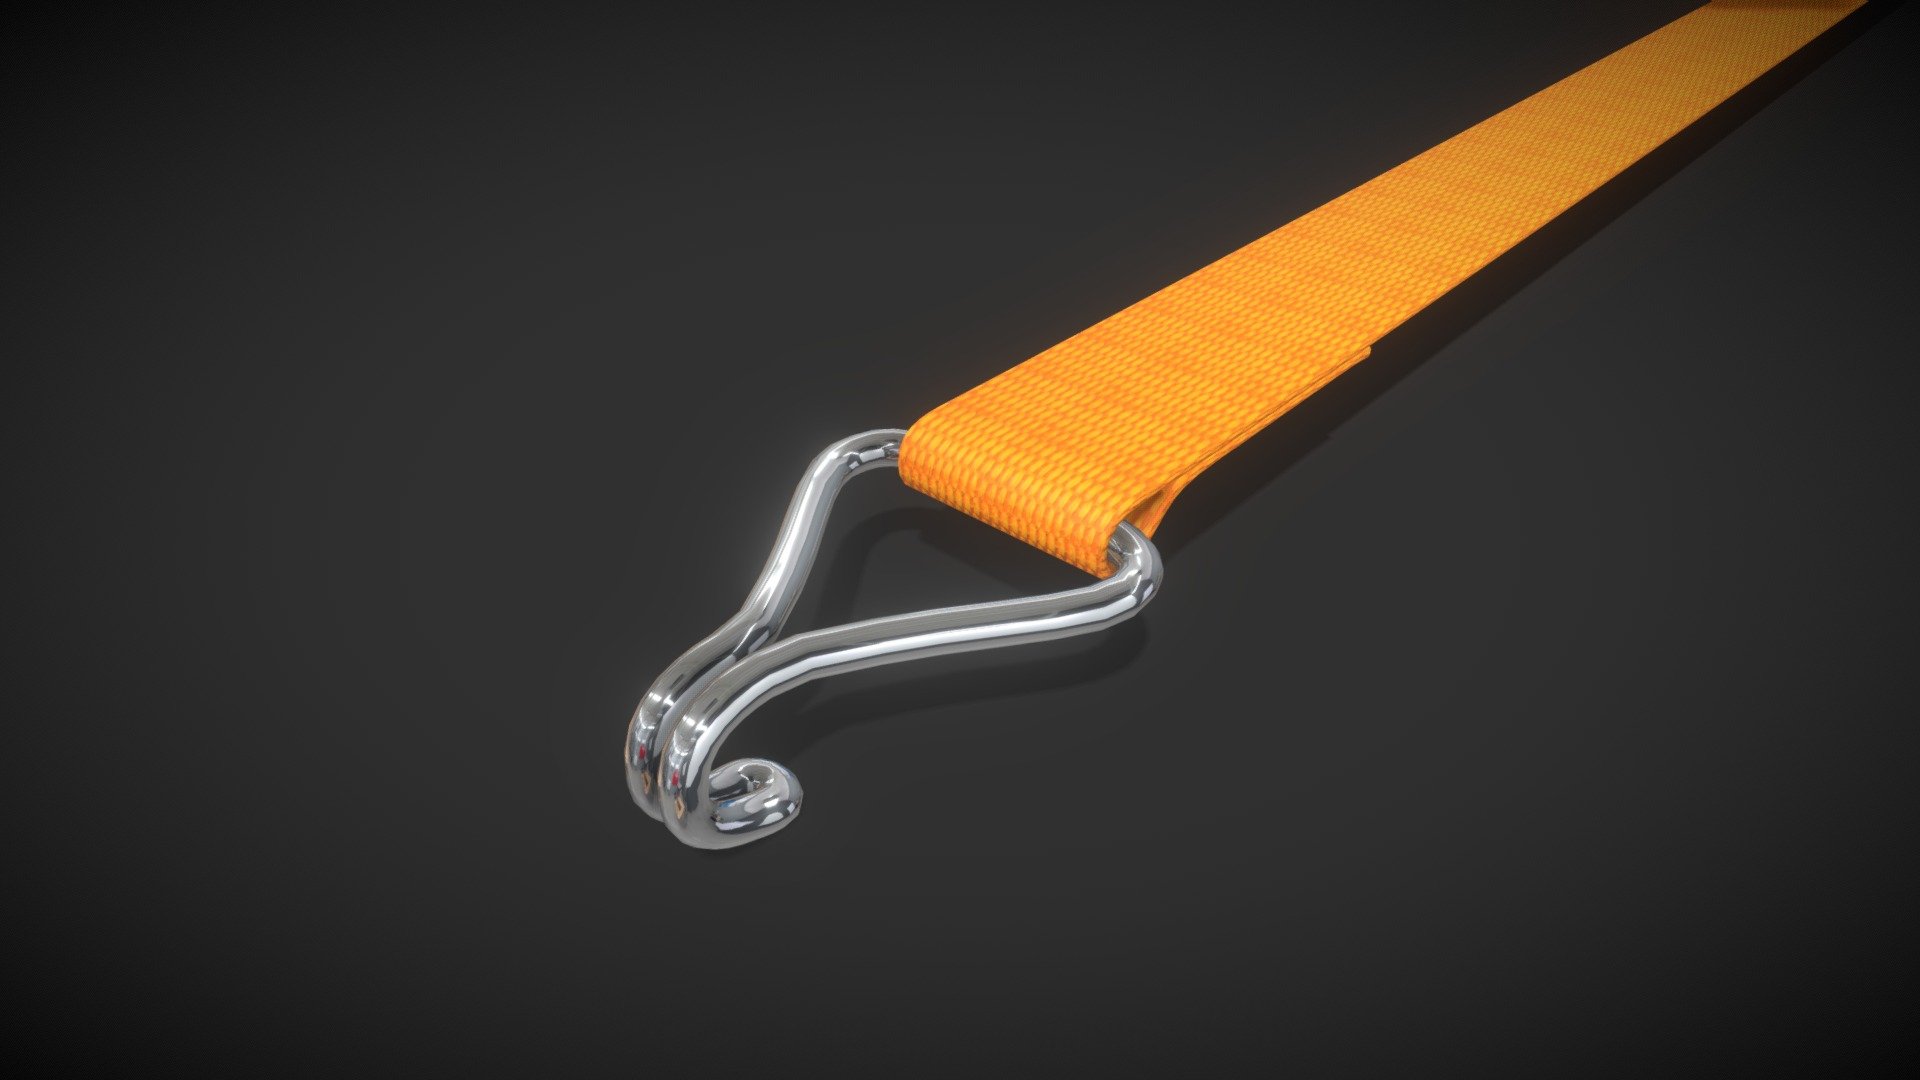 Strap - 3D model by The Learning Network (@TheLearningNetwork) 3d model